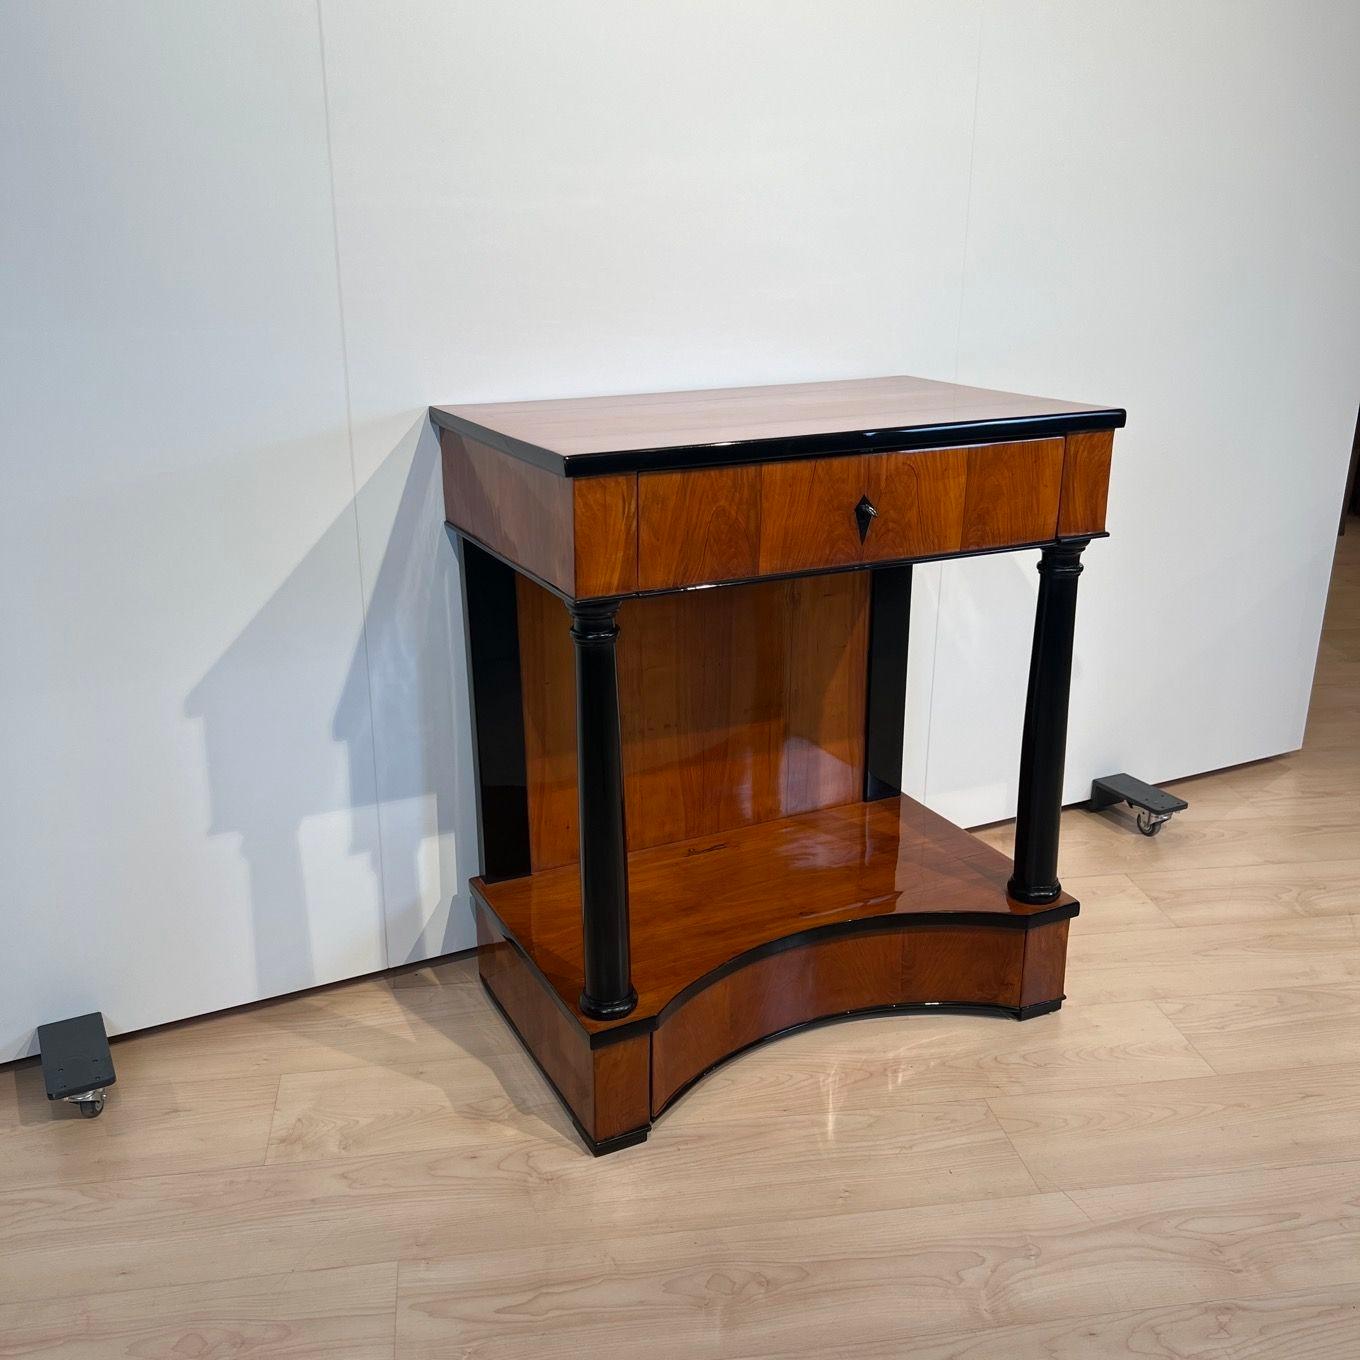 Biedermeier Console Table, Two Drawers, Cherry Veneer, South Germany circa 1820 In Good Condition For Sale In Regensburg, DE